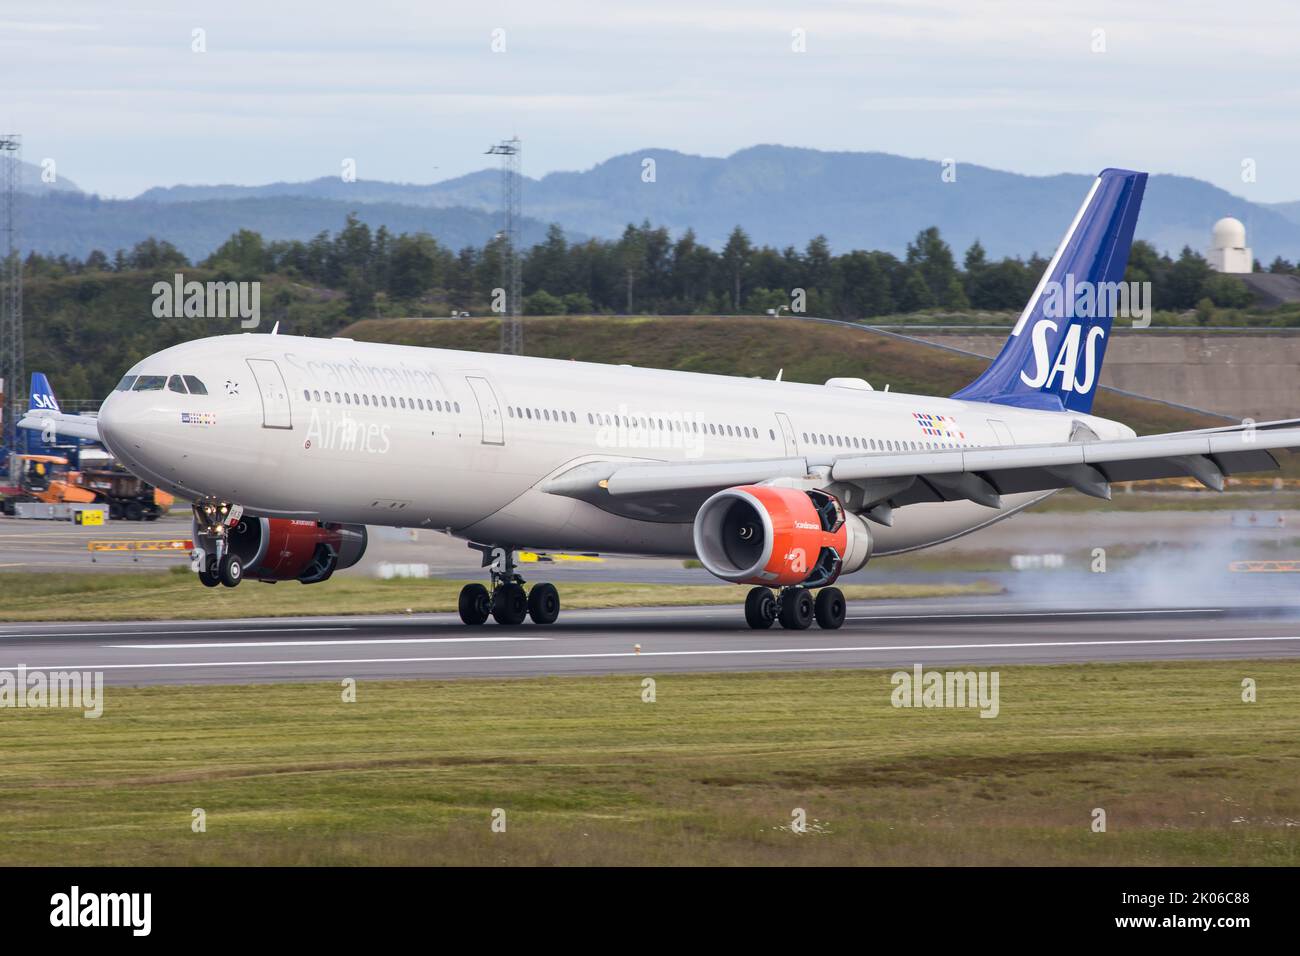 A SAS Scandinavian Airlines Airbus A330-300 arriving at Oslo Airport after a long range flight from the USA Stock Photo